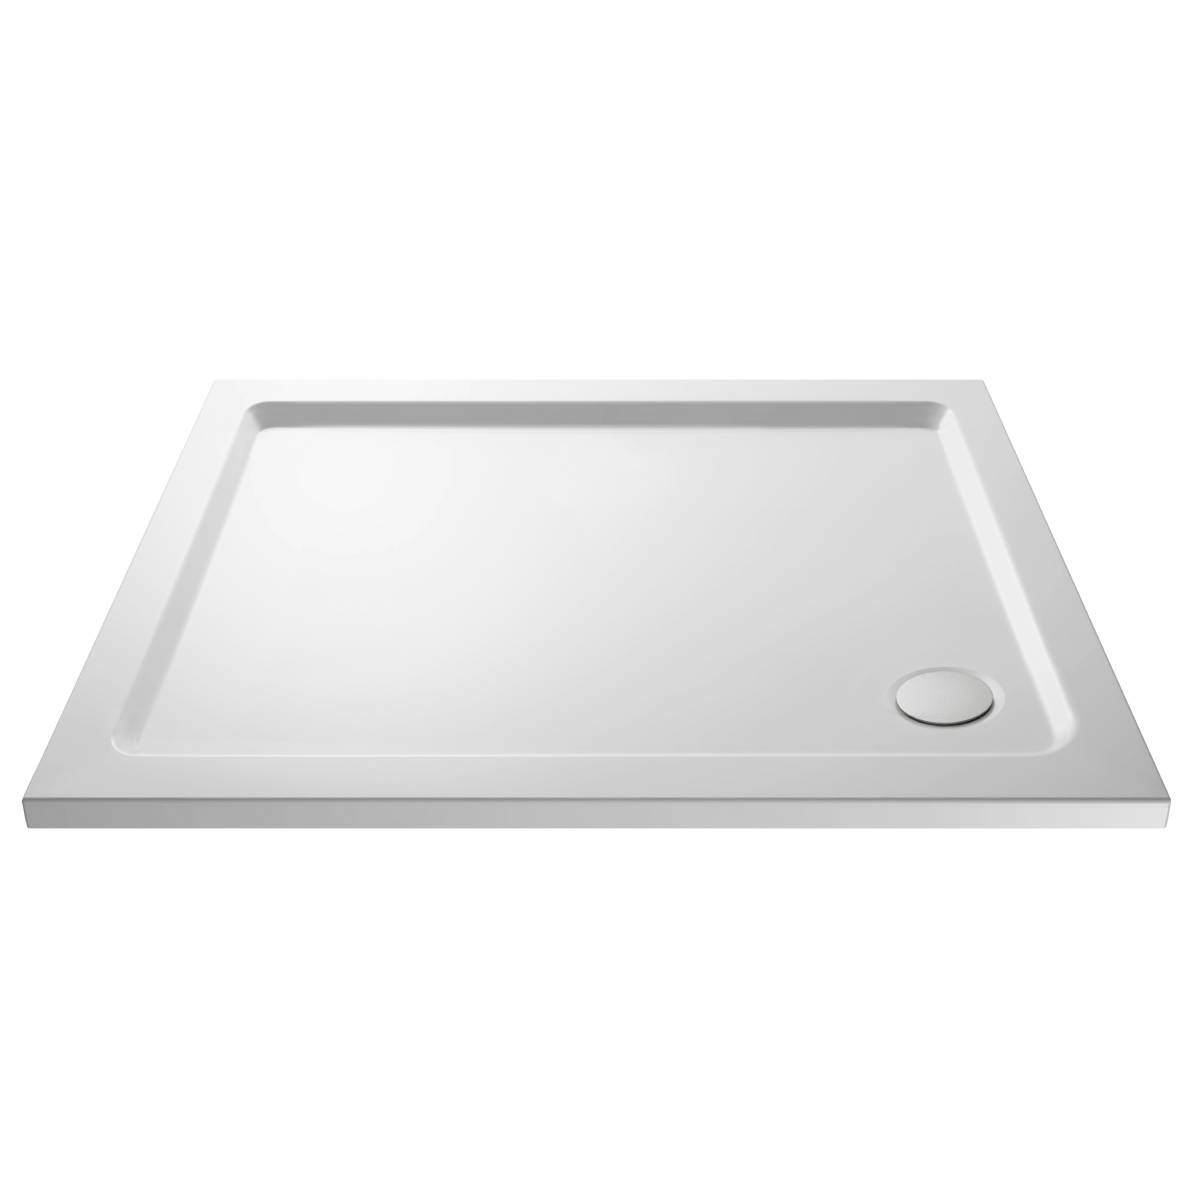 Hudson Reed 1000 x 900mm Rectangle Shower Tray NTP014 (1647)